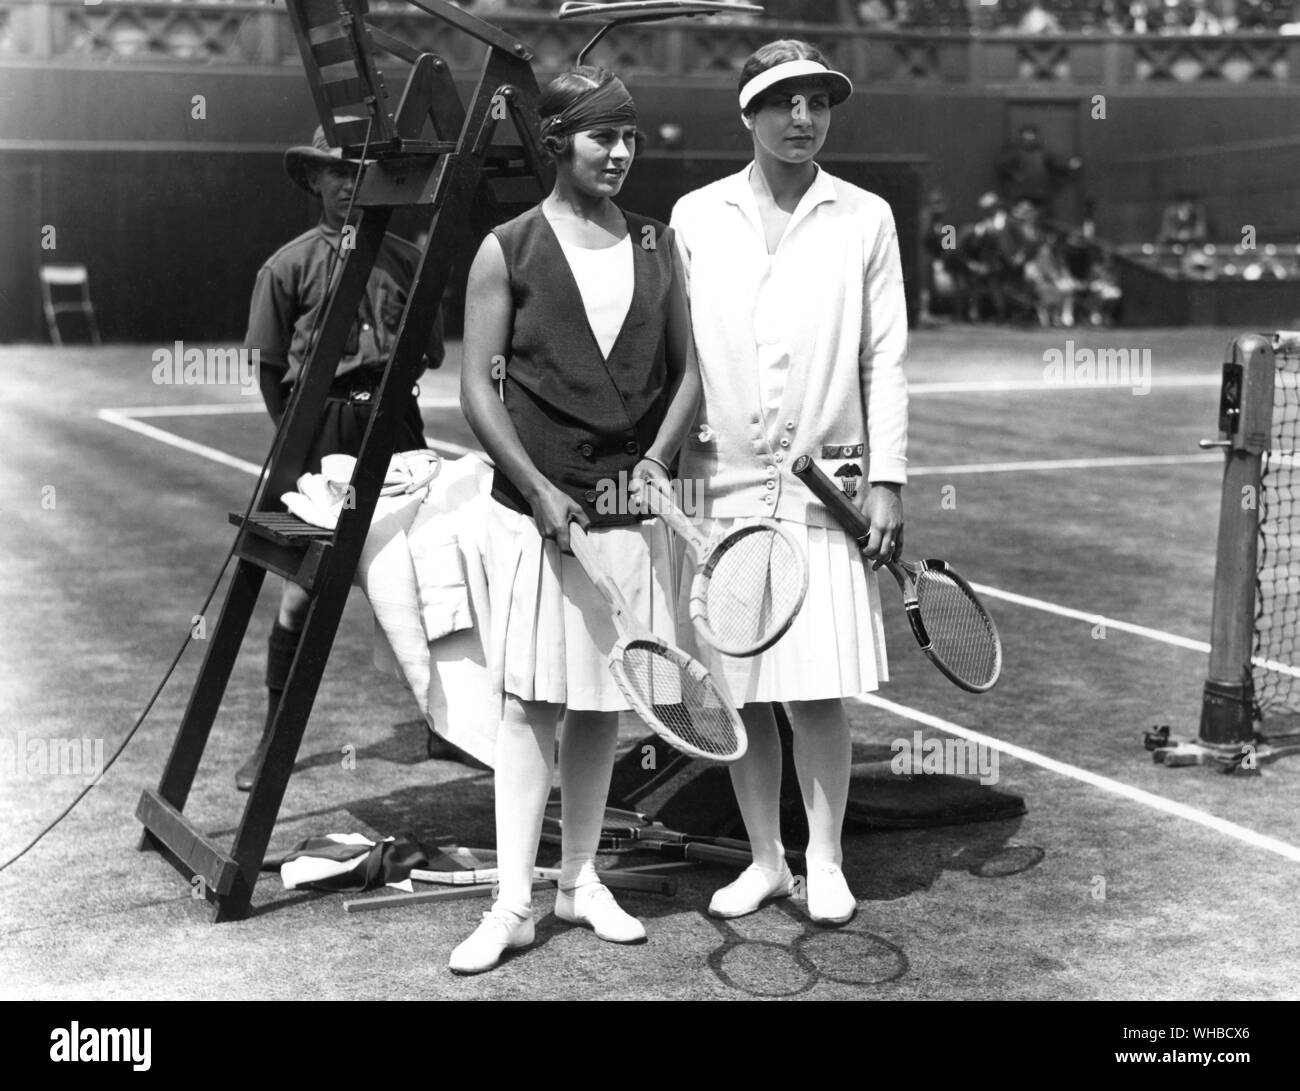 Moody and d'Alverez 1928 - tennis players. Lilí de Álvarez (May 9, 1905 - July 8, 1998) was a Spanish multi-sport competitor, an international tennis champion, an author, and a journalist, born Elia María González-Álvarez y López-Chicheri.. Helen Newington Wills Roark (October 6, 1905 - January 1, 1998), also known as Helen Wills Moody, was an American tennis player who is generally considered to have been one of the greatest female tennis players of all time.. Stock Photo